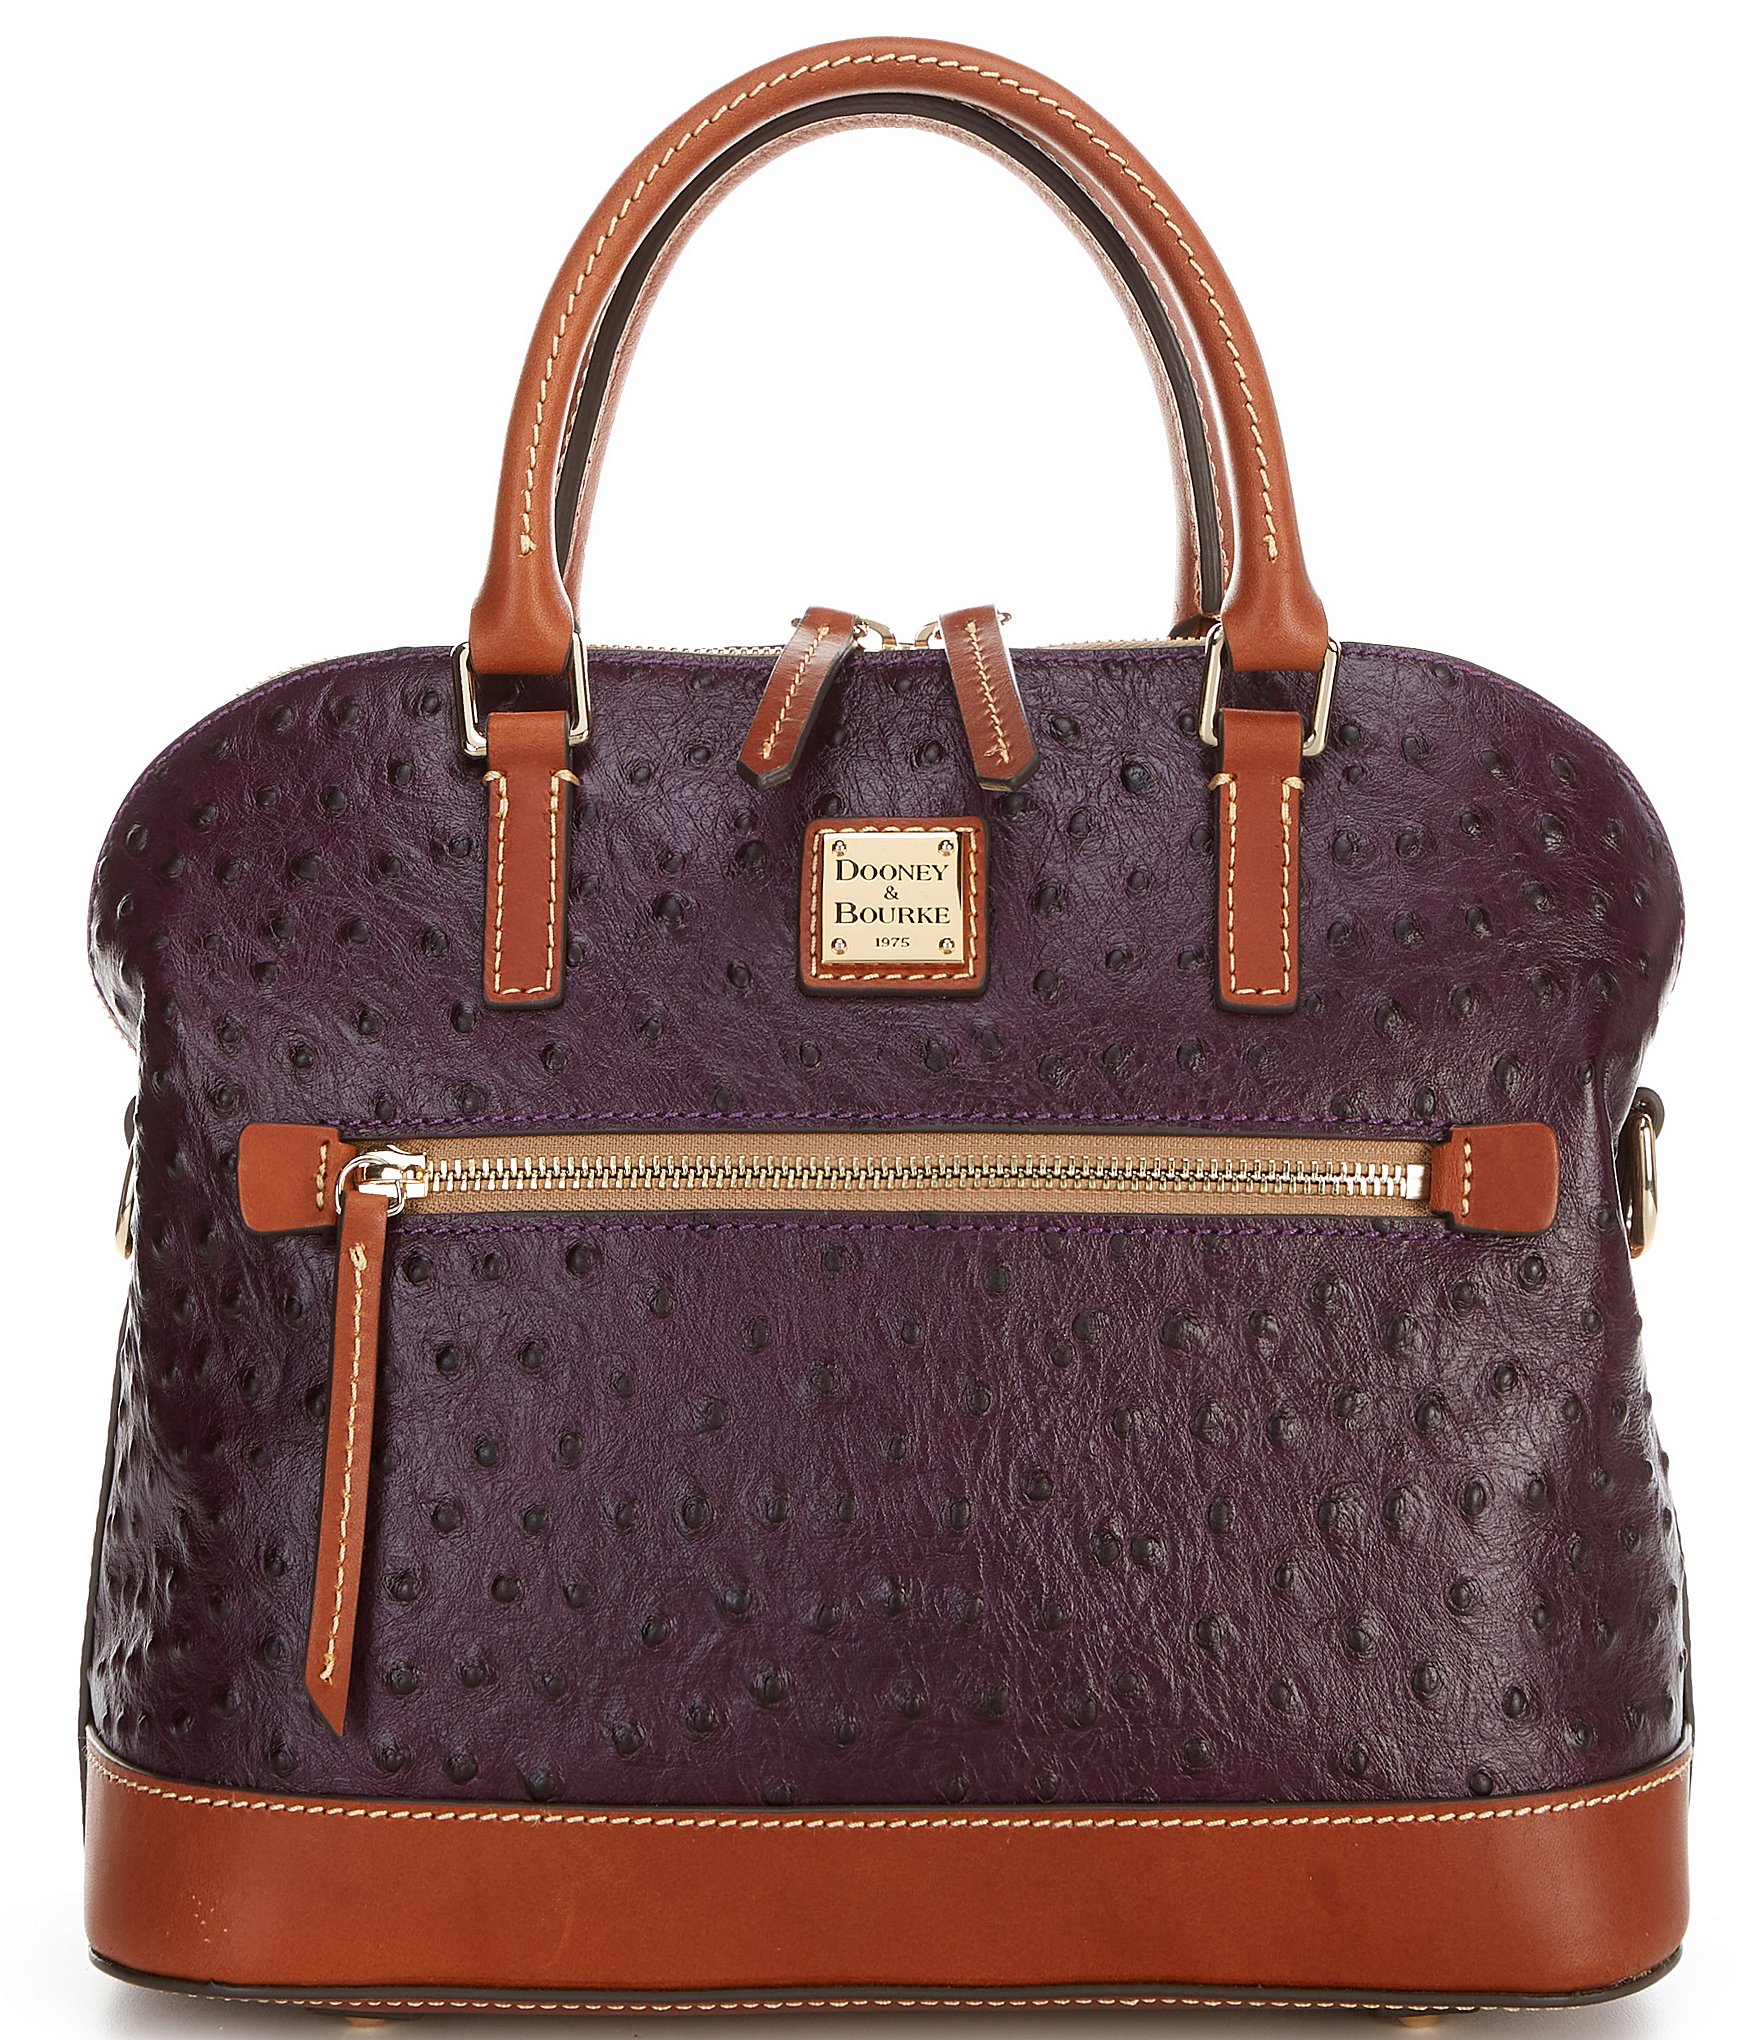 Dooney Bourke Ostrich Collection Leather Tote Bag - Brown Tmorrow